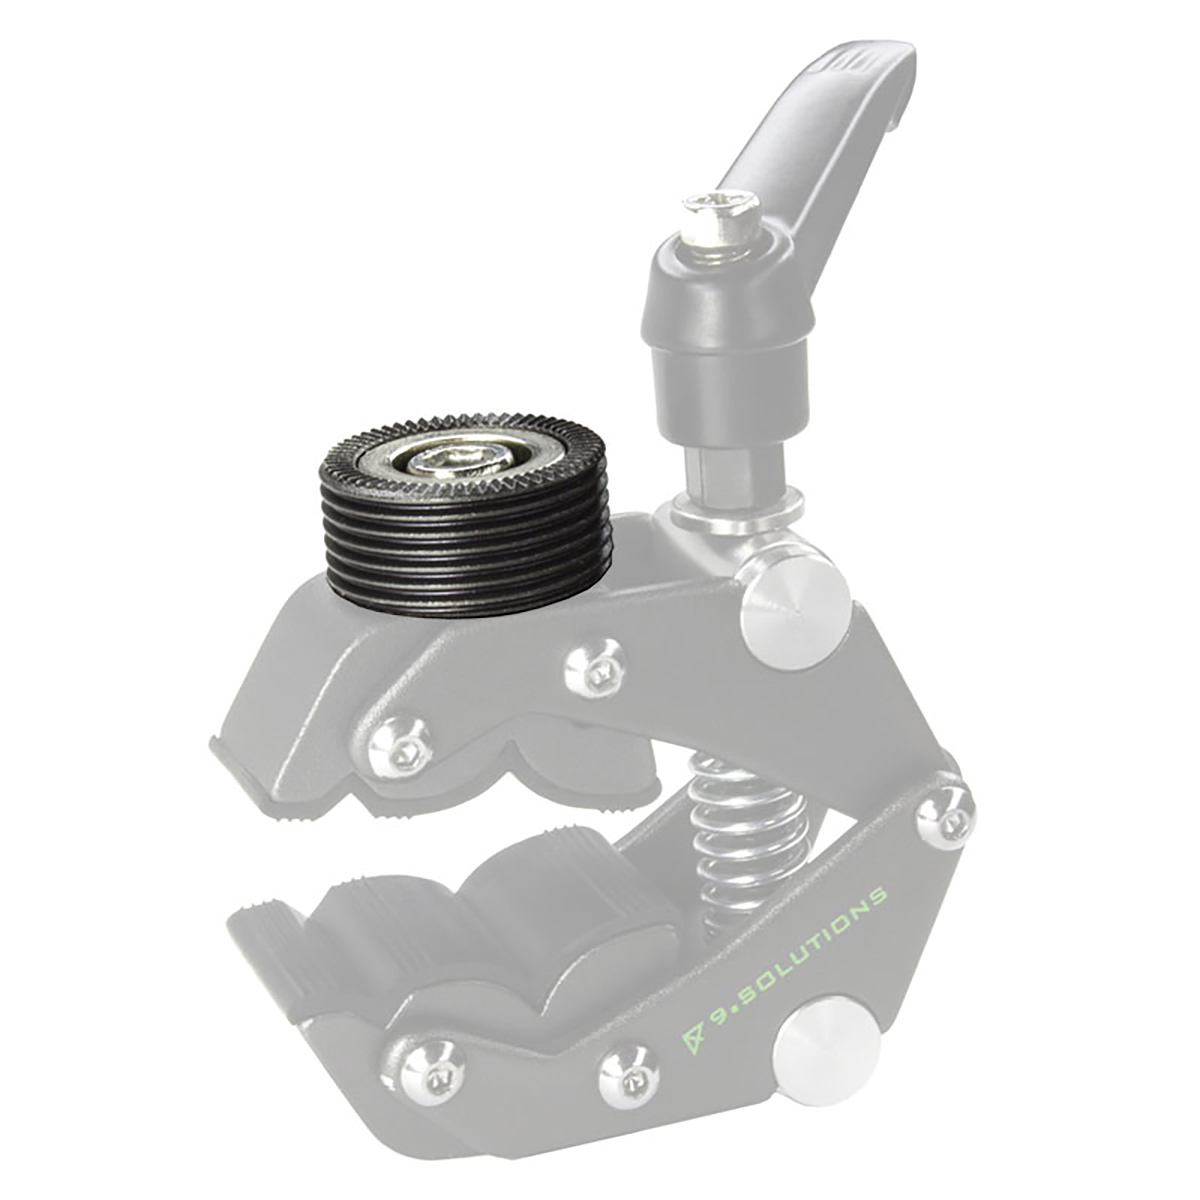 9.Solutions 1/4"-20 Thread-on Quick Mount Receiver